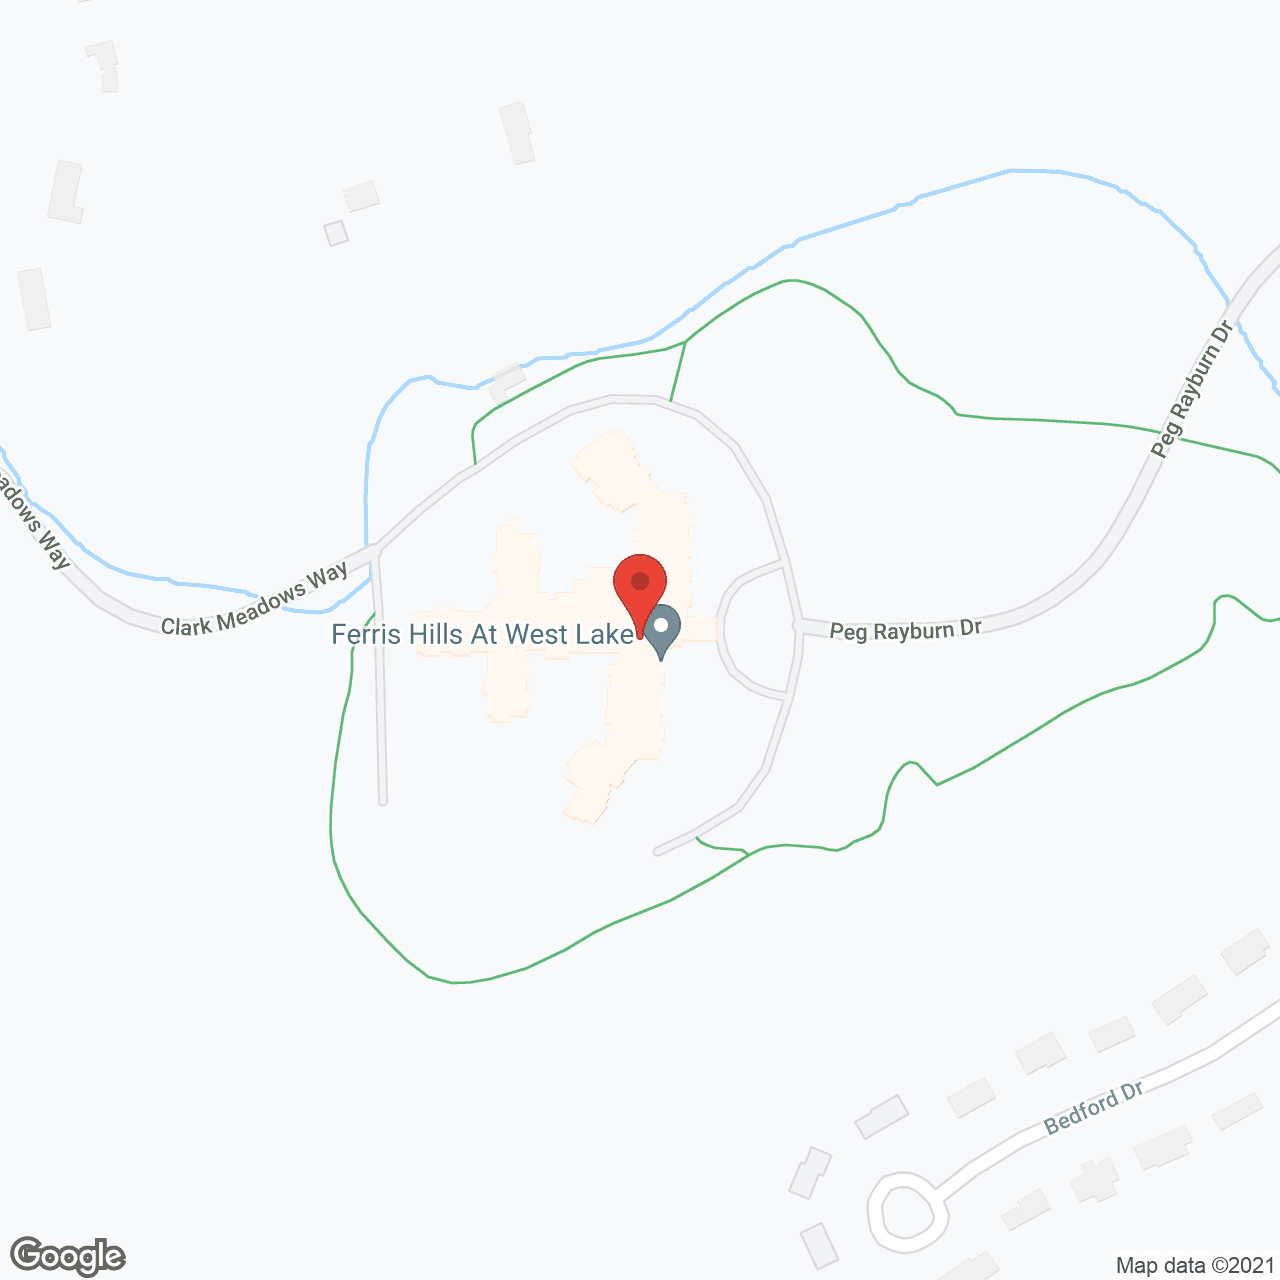 Ferris Hills at West Lake in google map